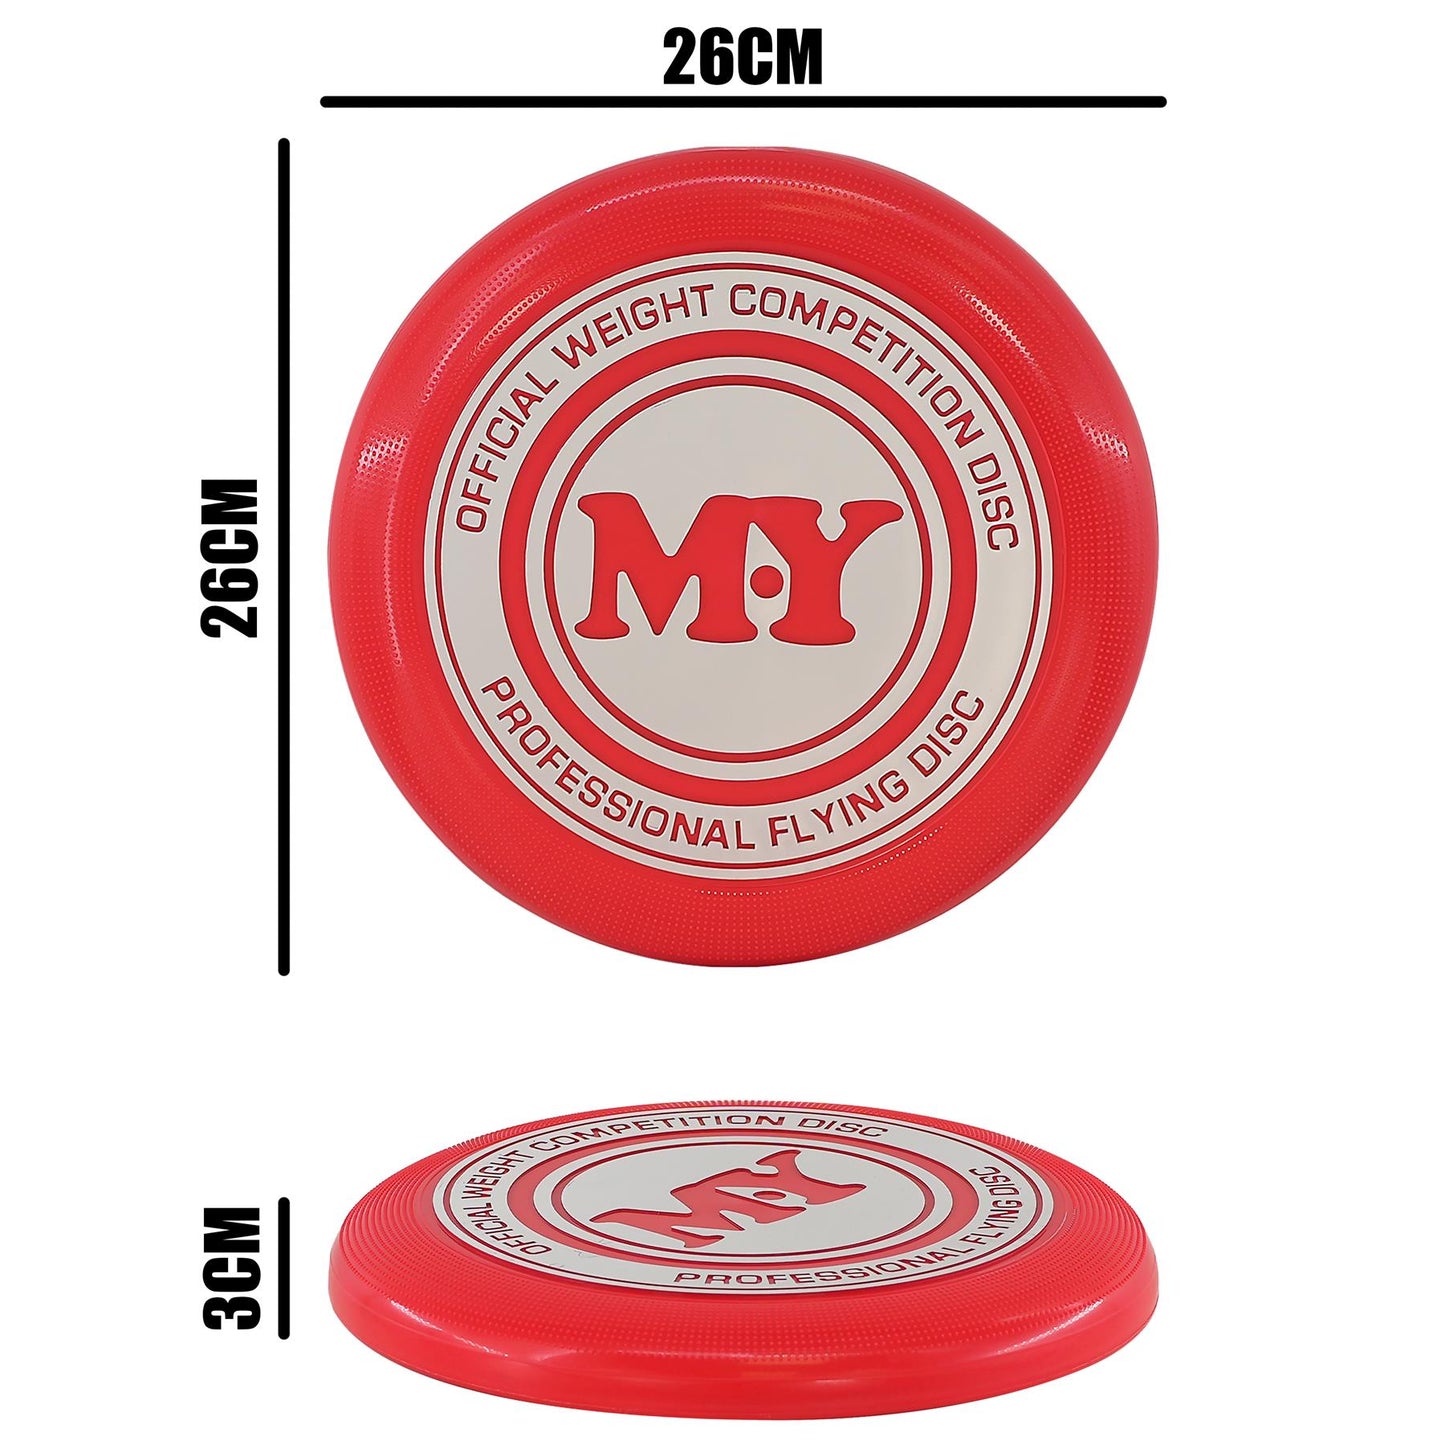 Professional Frisbee 4 Assorted Colours by The Magic Toy Shop - UKBuyZone